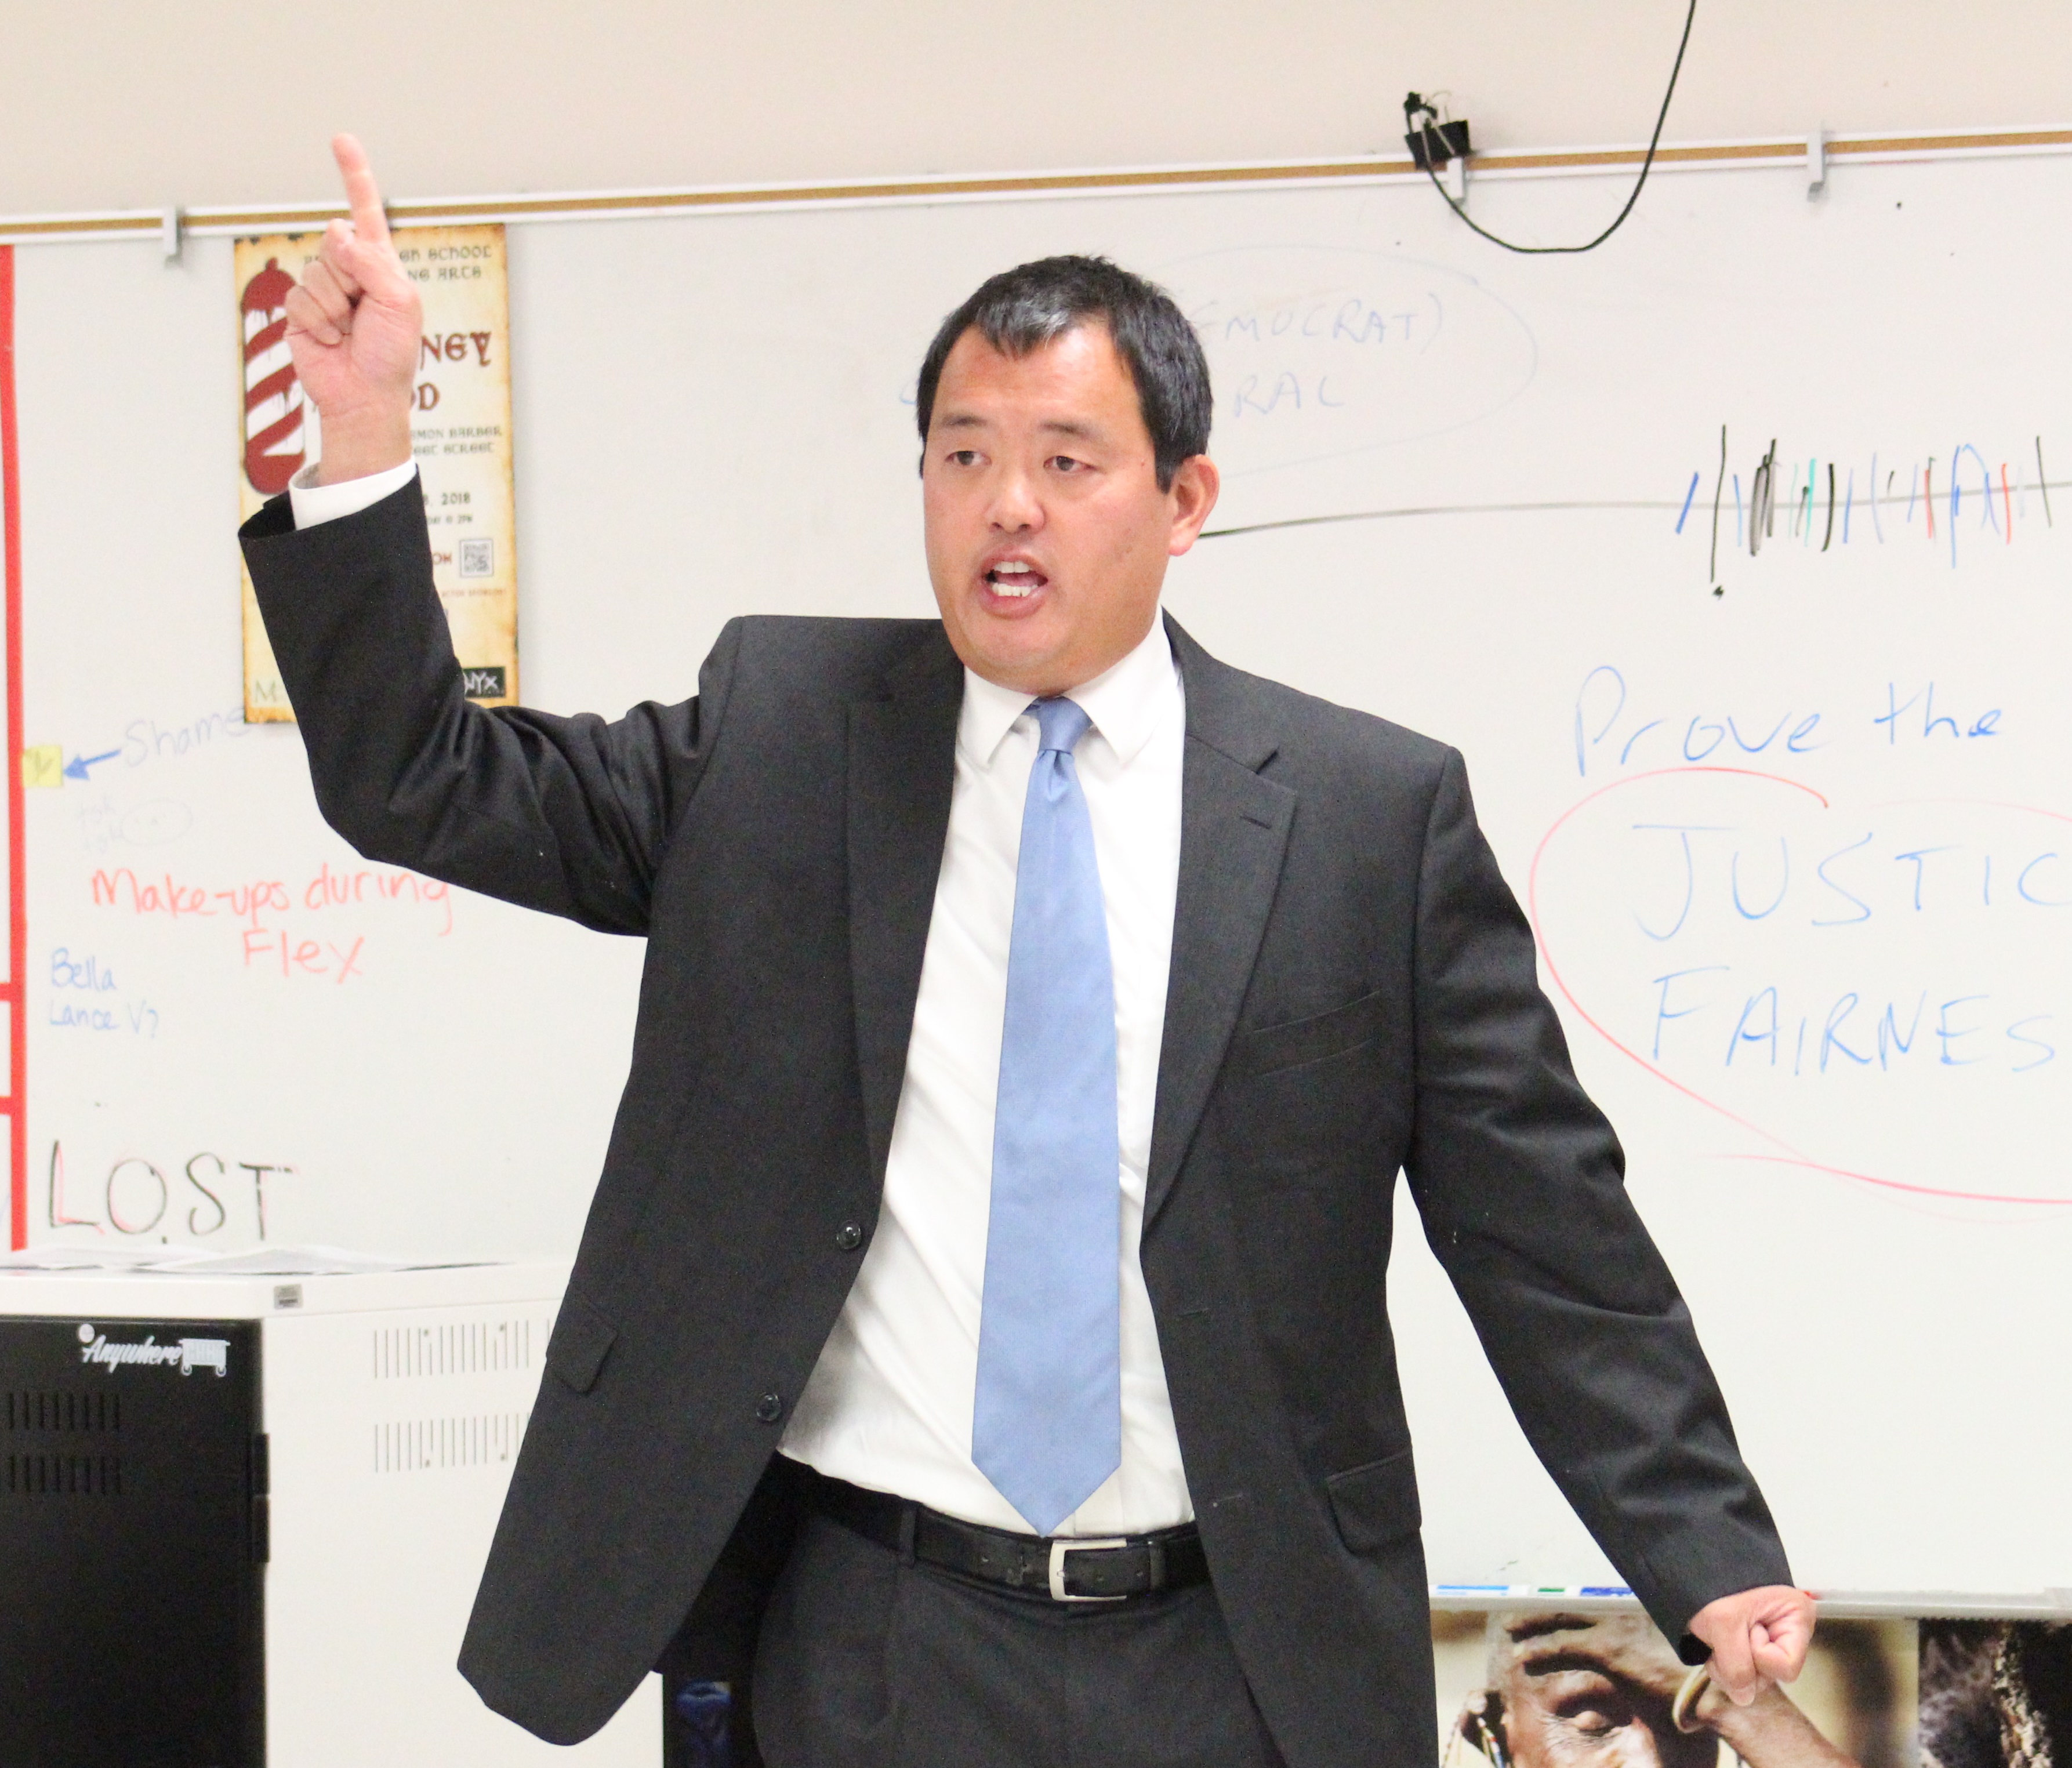 David Lim talks about the experiences and politics of being a deputy district attorney.